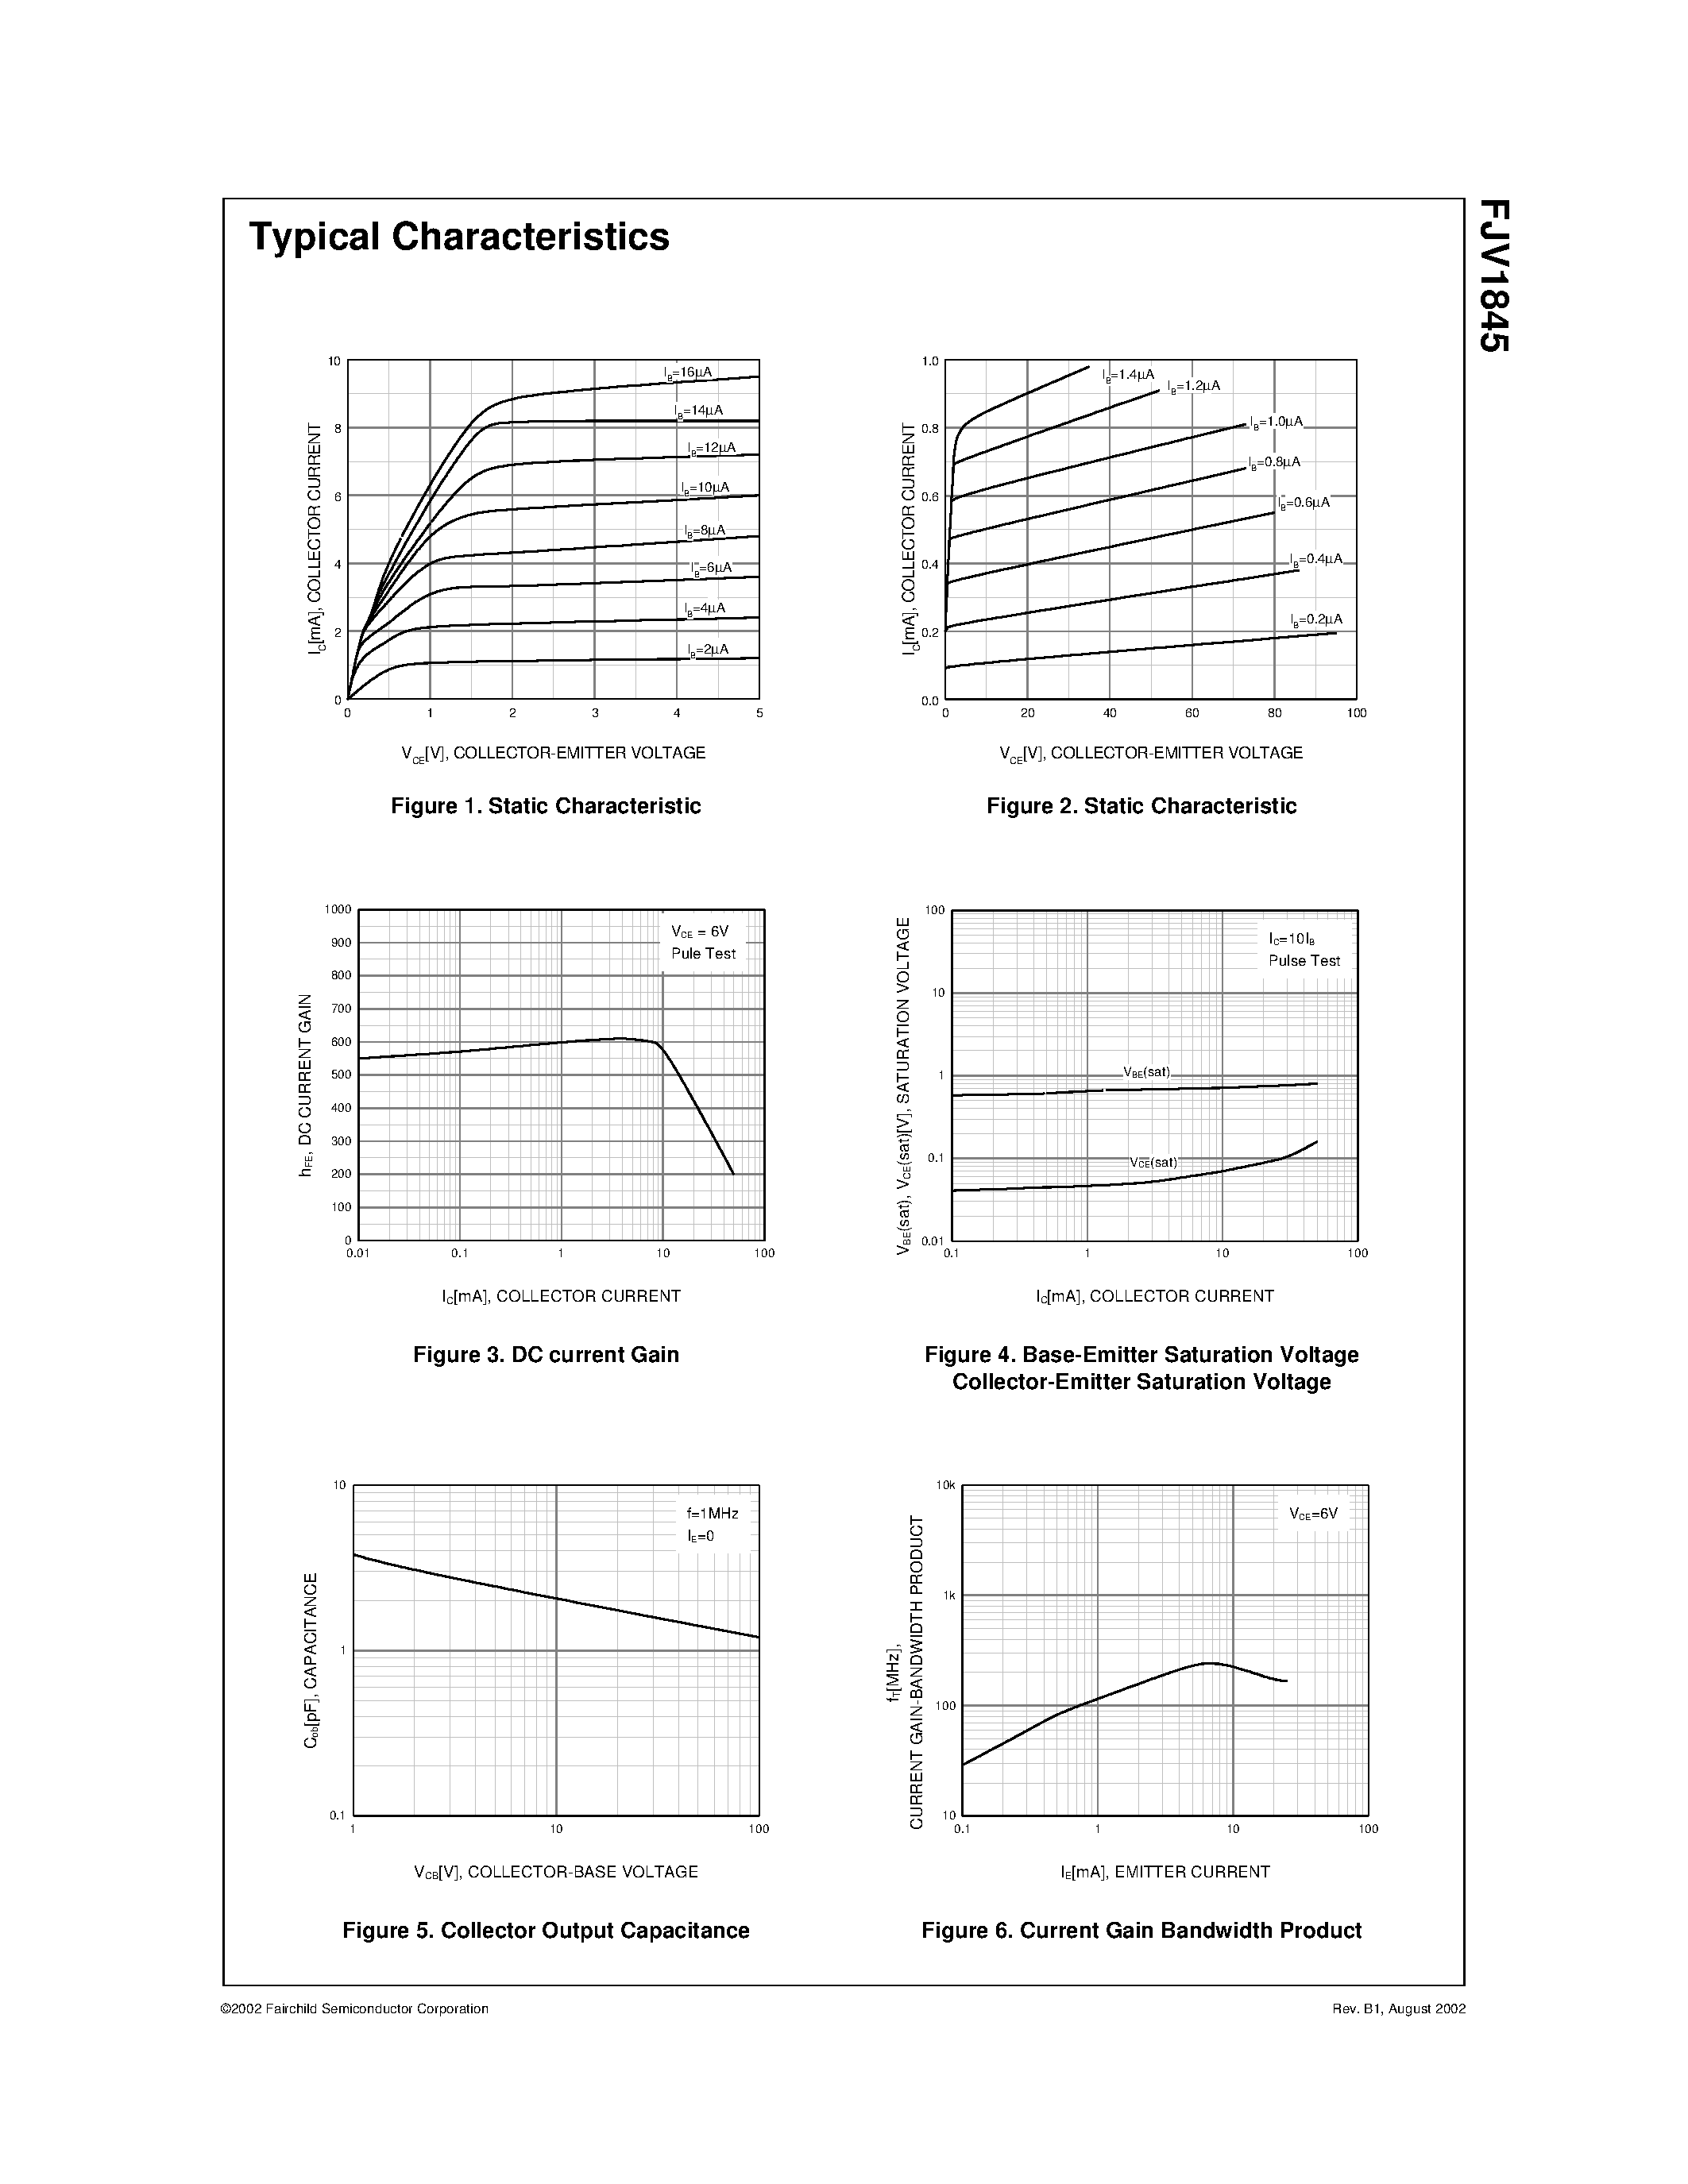 Datasheet FJV1845 - NPN Epitaxial Silicon Transistor page 2